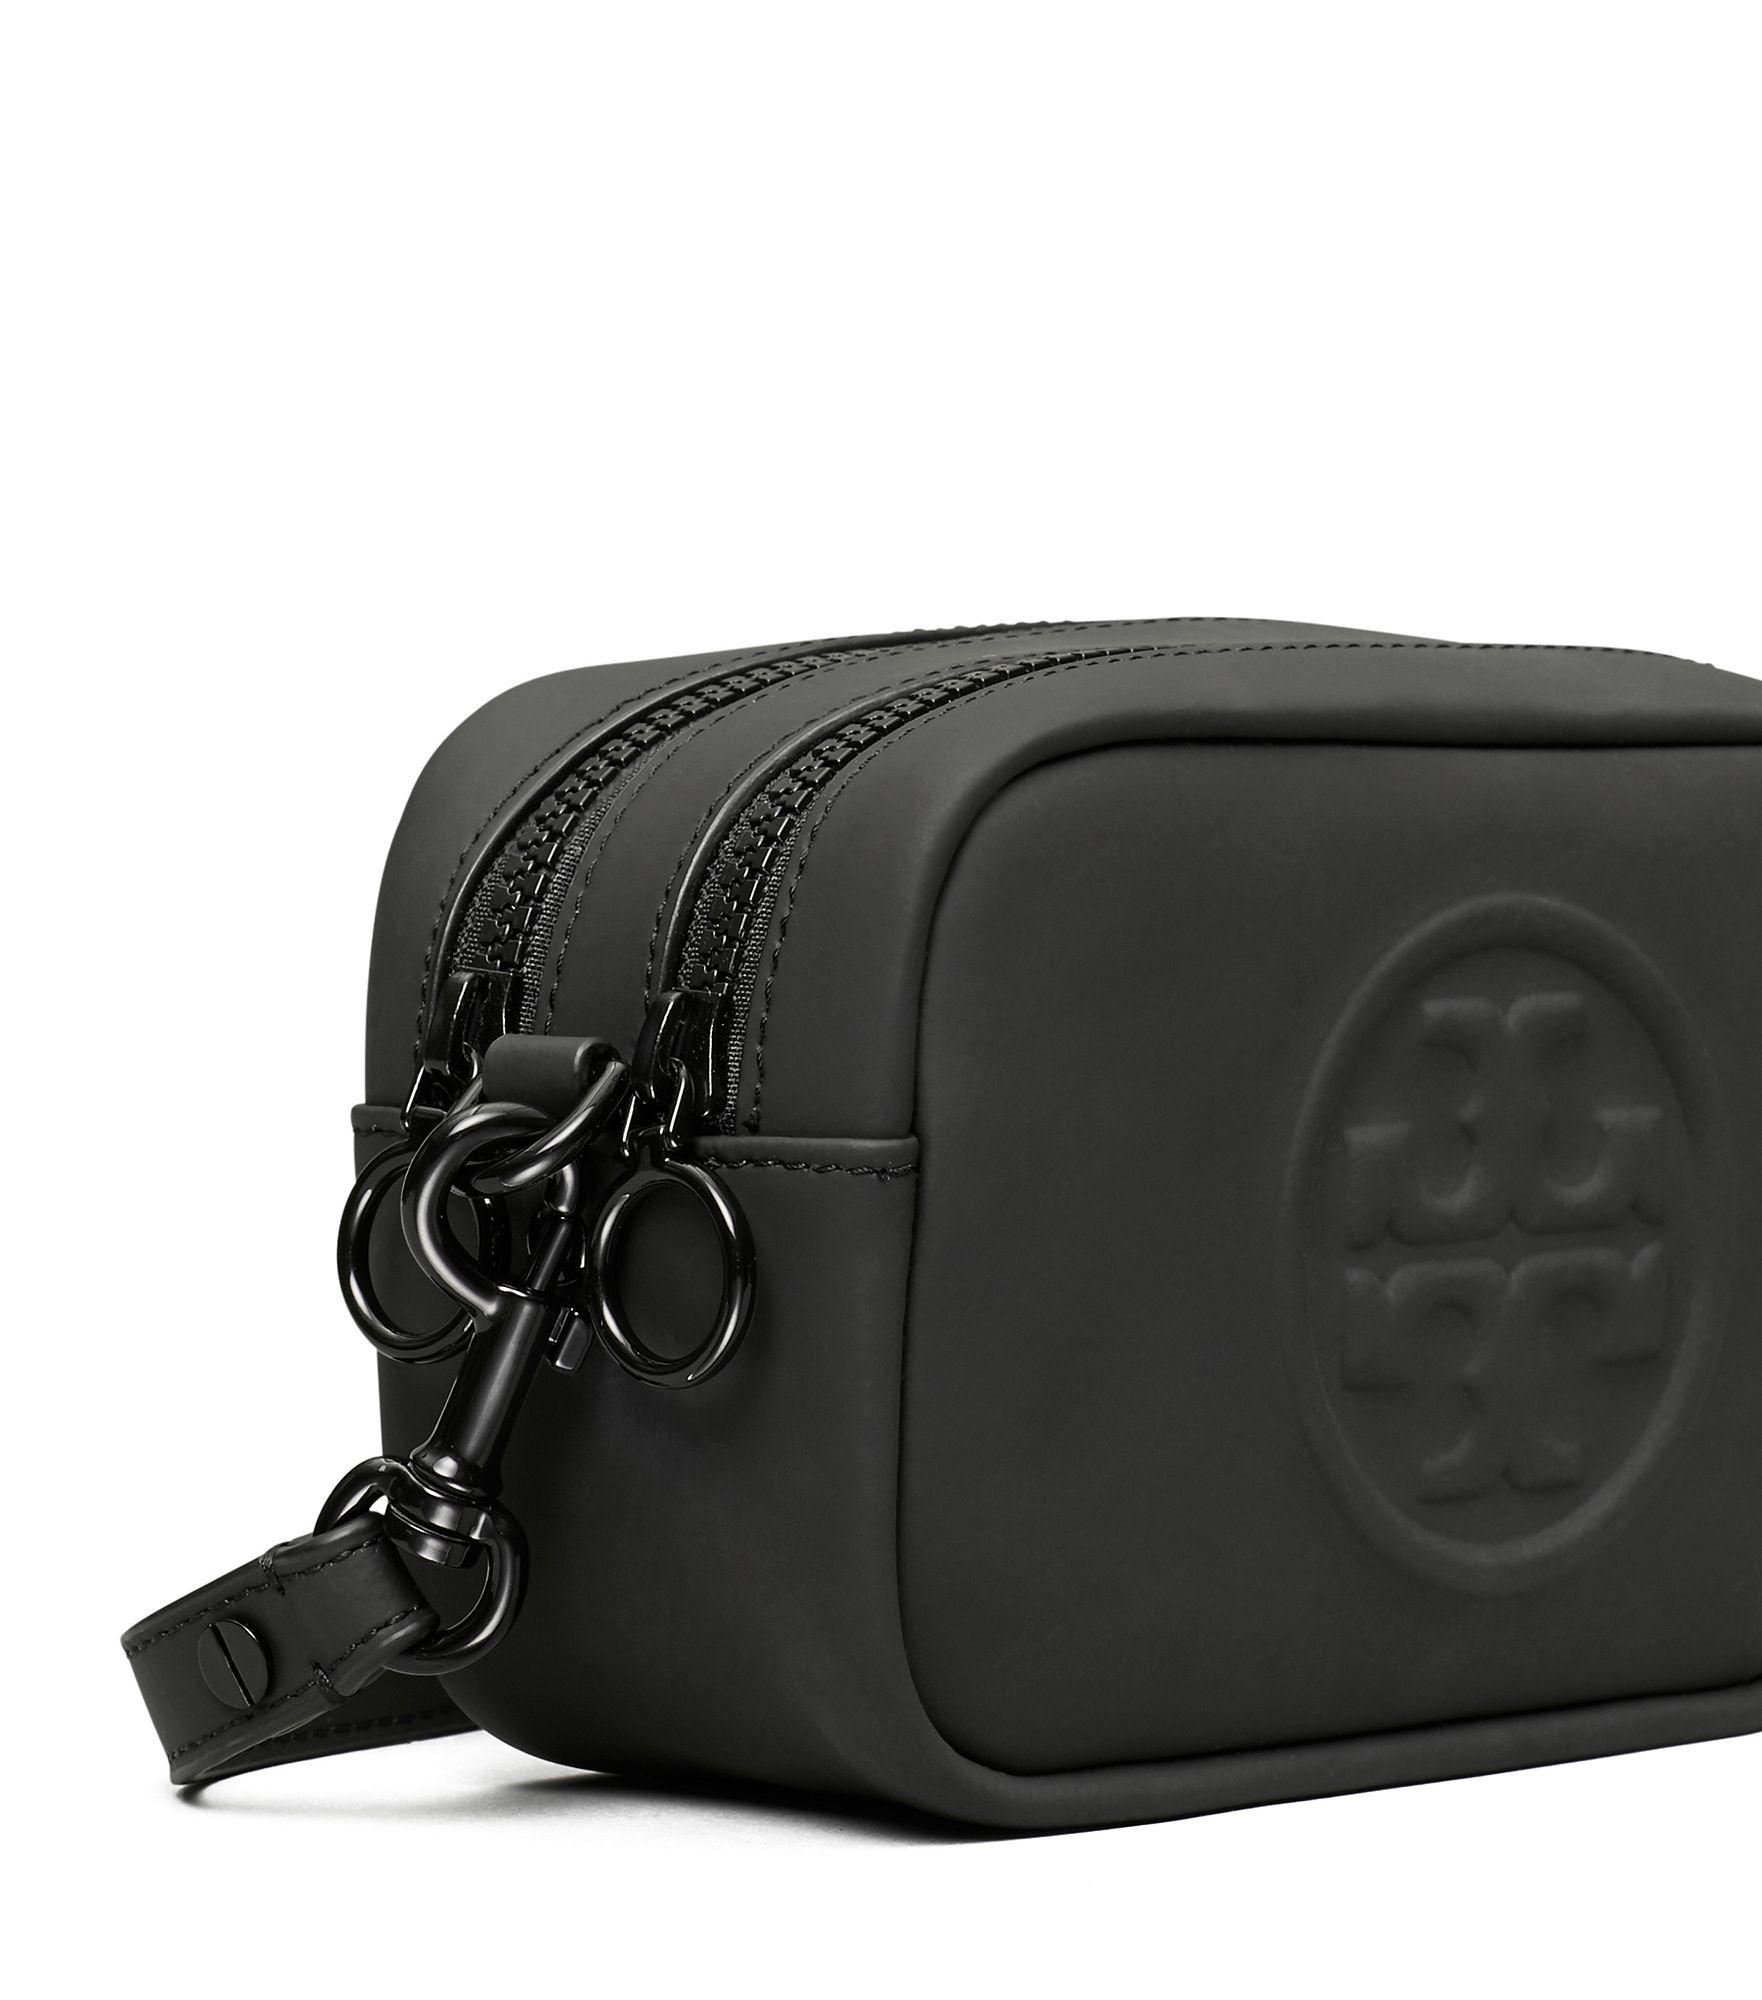 Tory Burch Leather Perry Bombe Matte Mini Bag in Black - Lyst